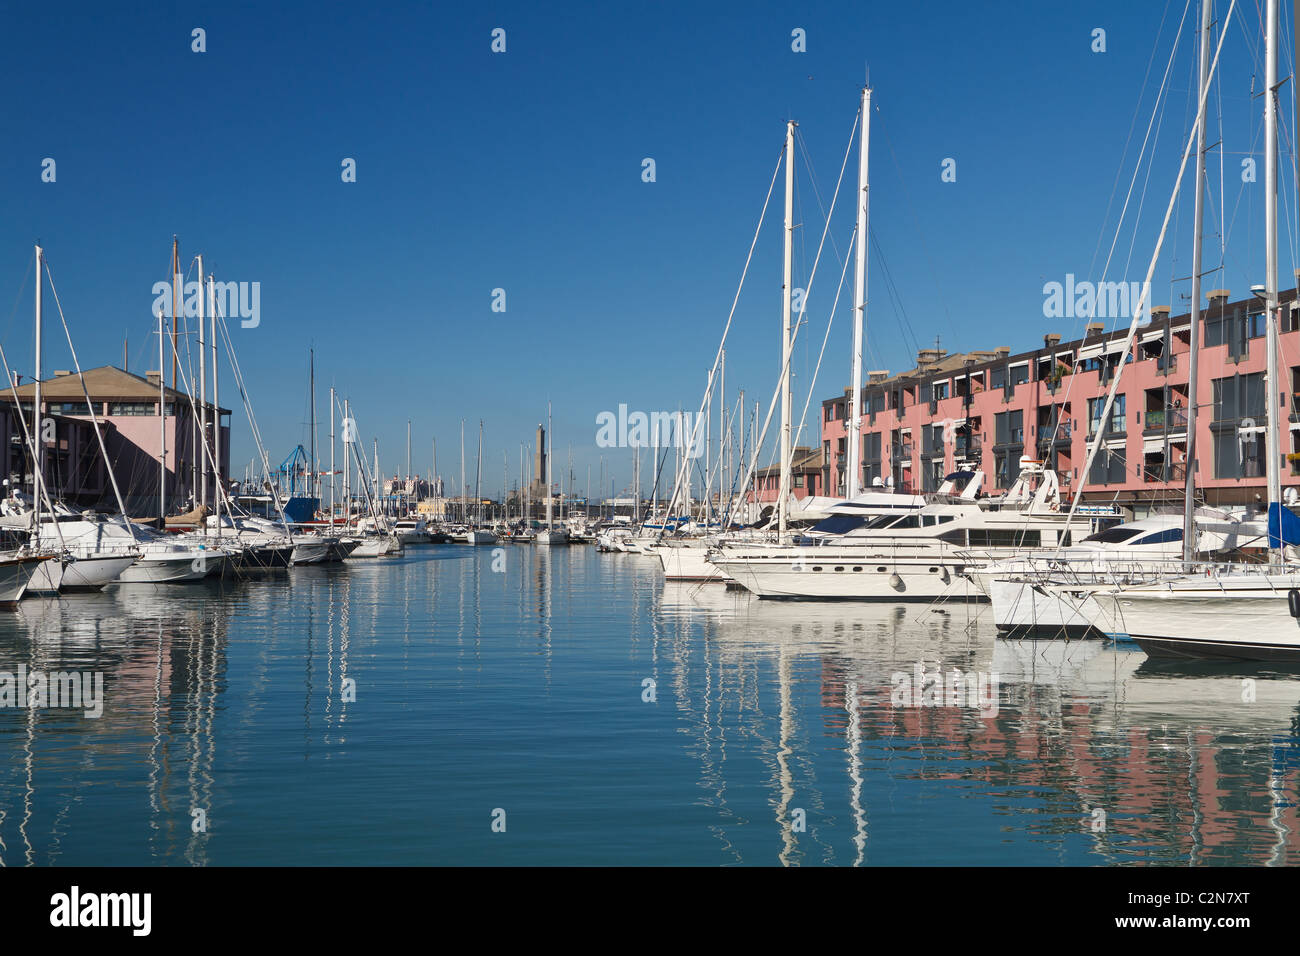 the touristic port in Genova, Italy on a beautiful sunny day Stock Photo